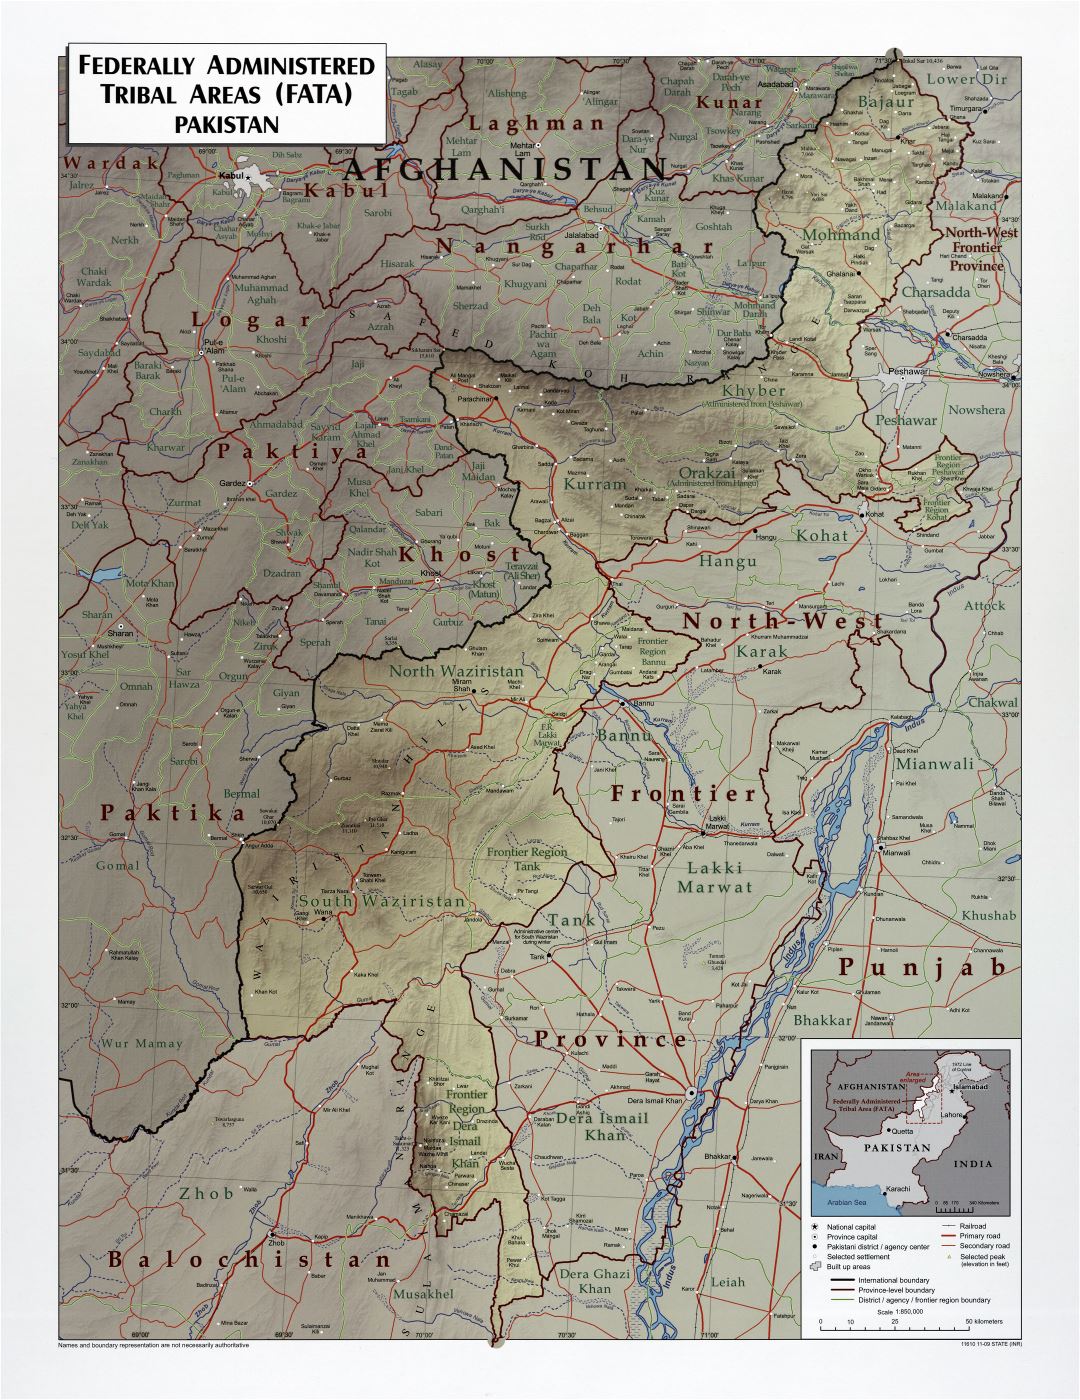 Large scale detailed Federally Administered Tribal Areas (FATA) of Pakistan map with relief, roads, railroads and cities - 2009